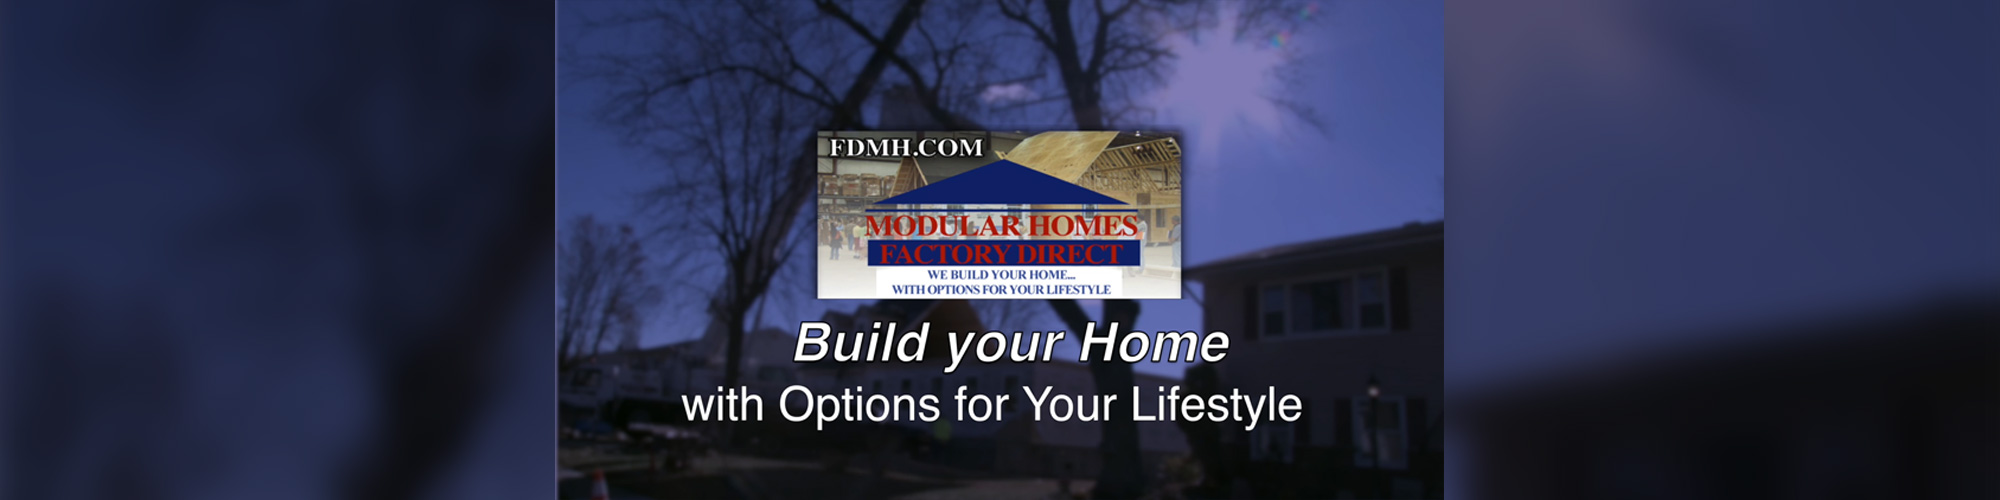 Build your home with Options for your Lifestyle